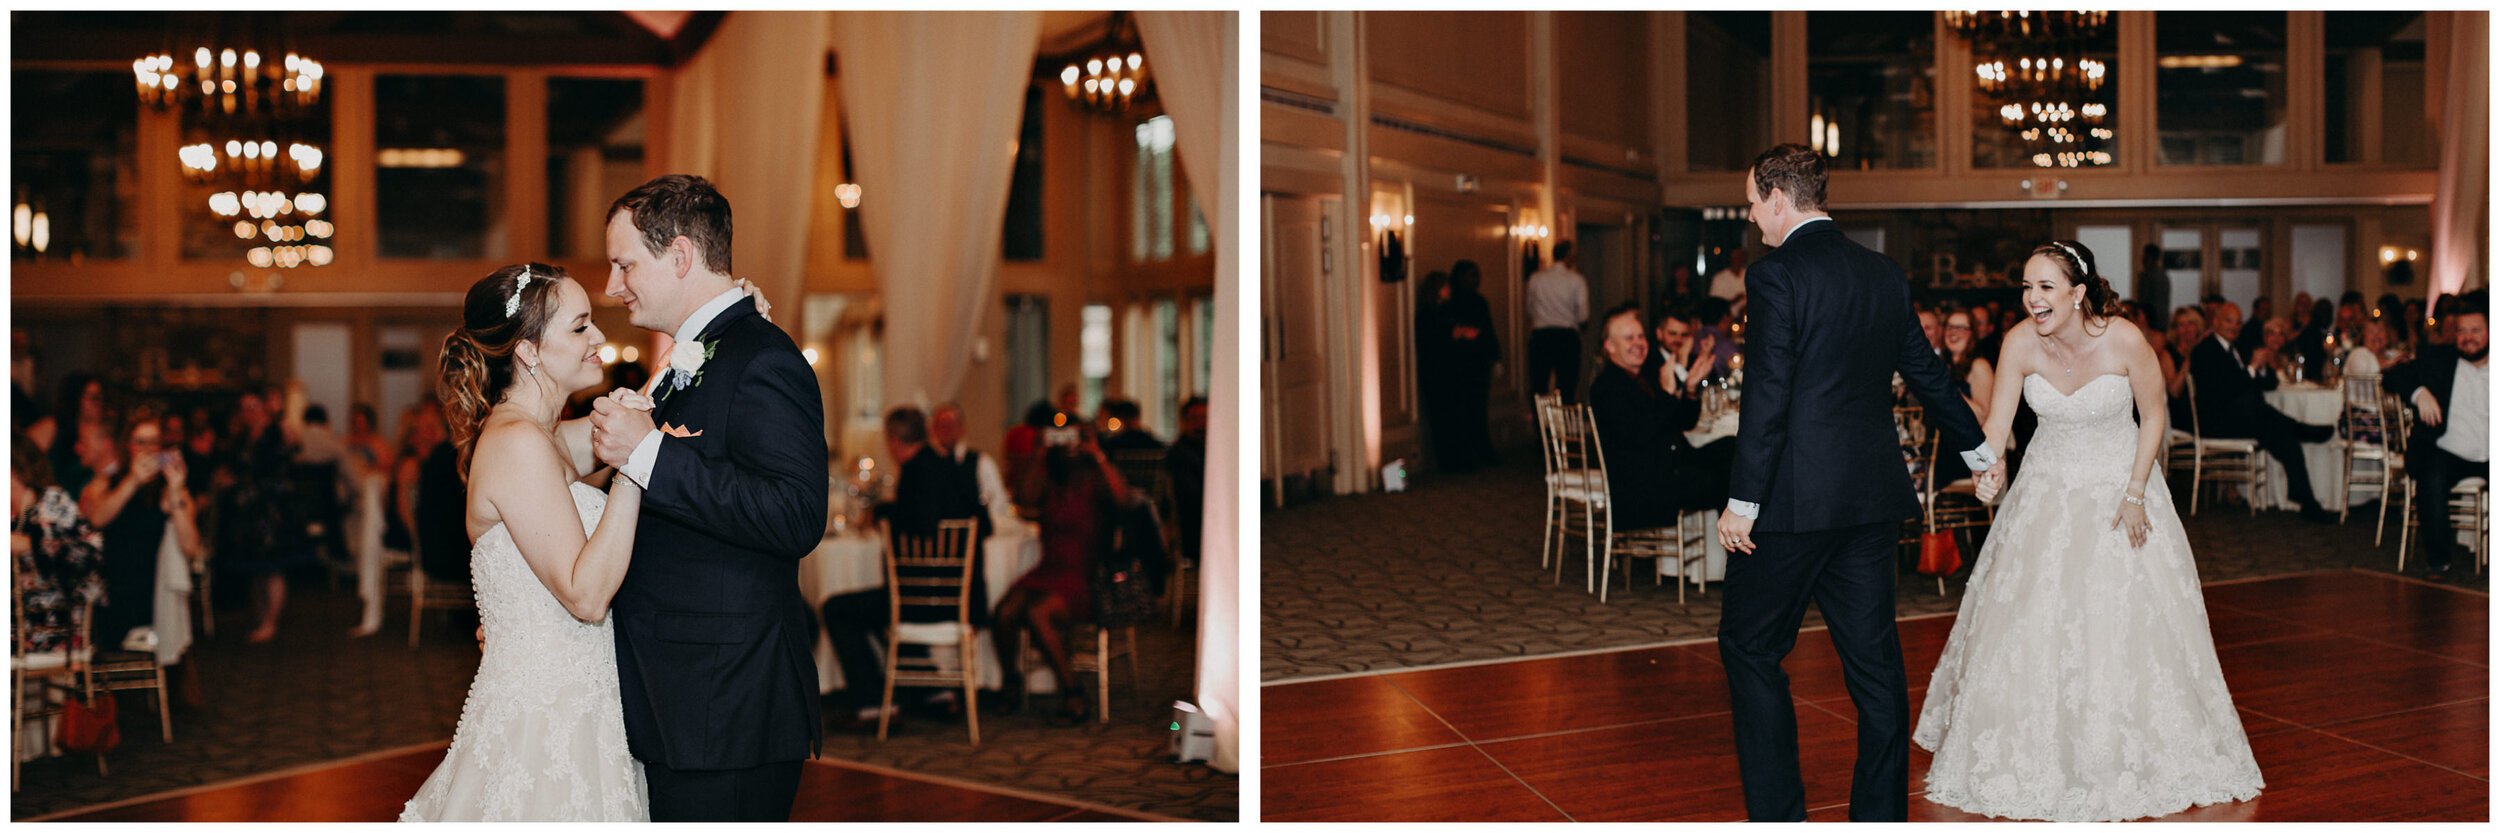 Christa & Ben's Wedding Day || Atlanta Spring Wedding at The Country Club of The South63.jpg